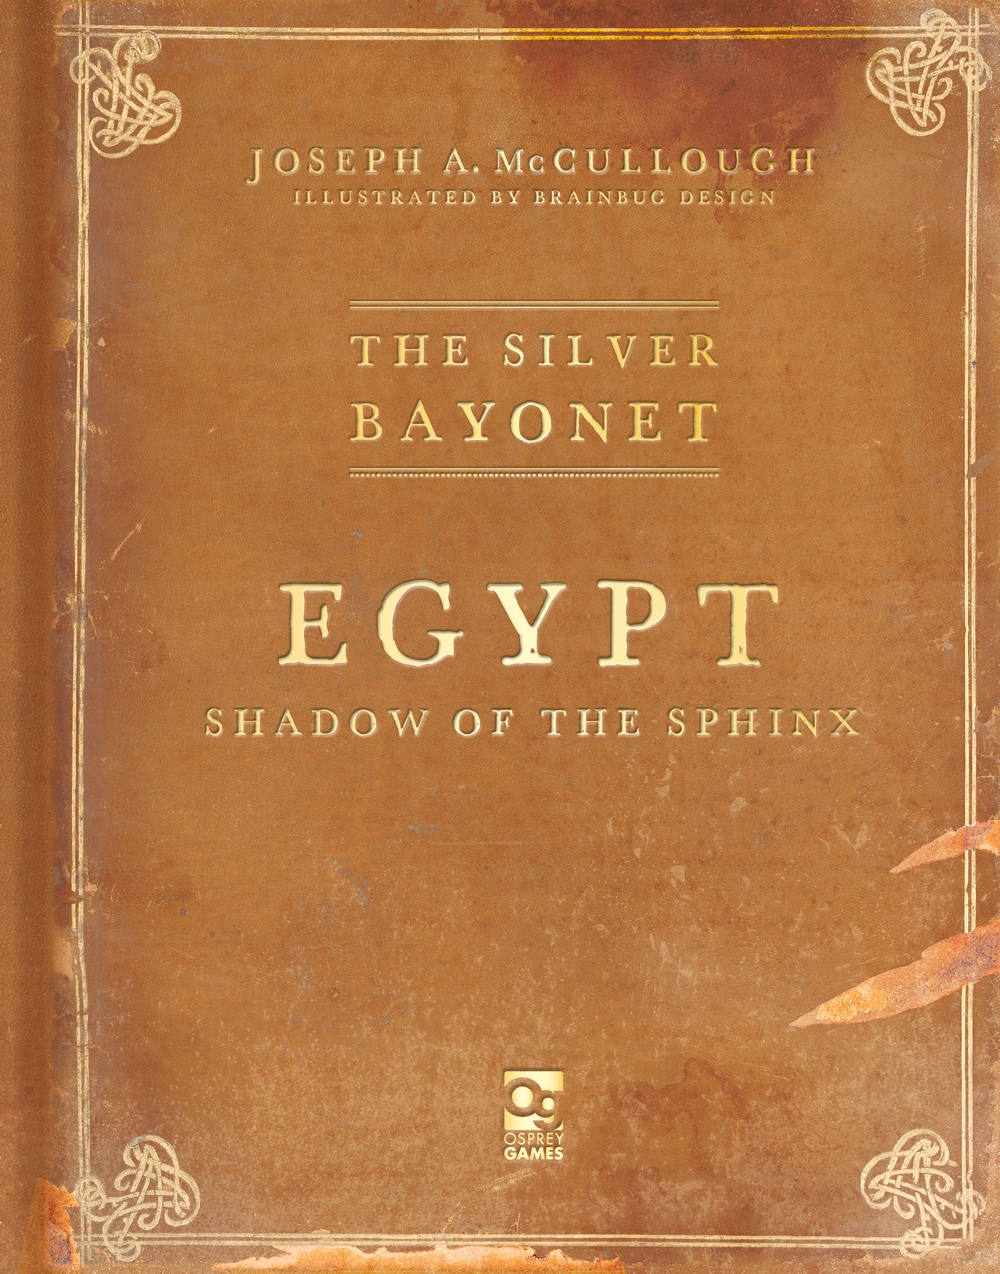 Silver Bayonet: Egypt: Shadow of the Sphinx book jacket